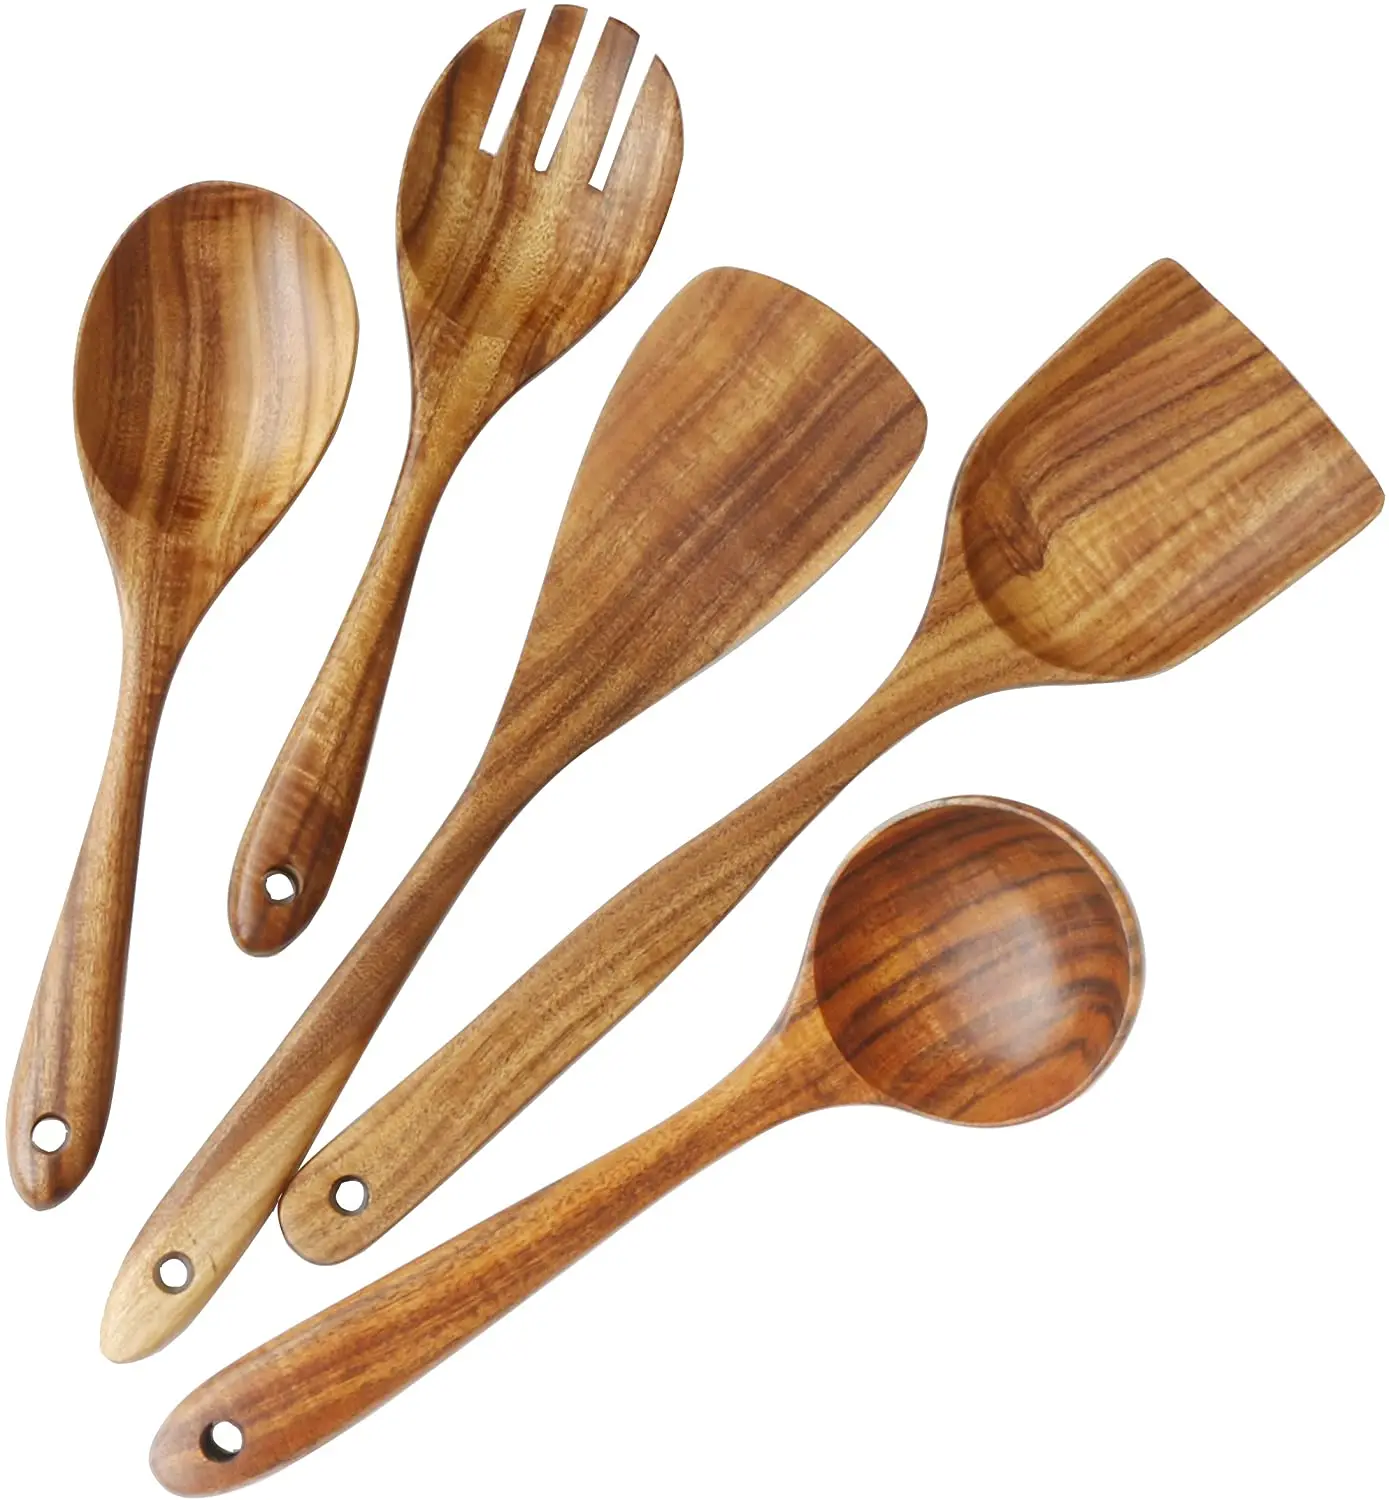 

Eco Friendly Kitchenware Accessories 5 Pcs Kitchen SaLad Server Soup Spoon and Spatula Teak Wood Cooking Utensils Set, Natural wood